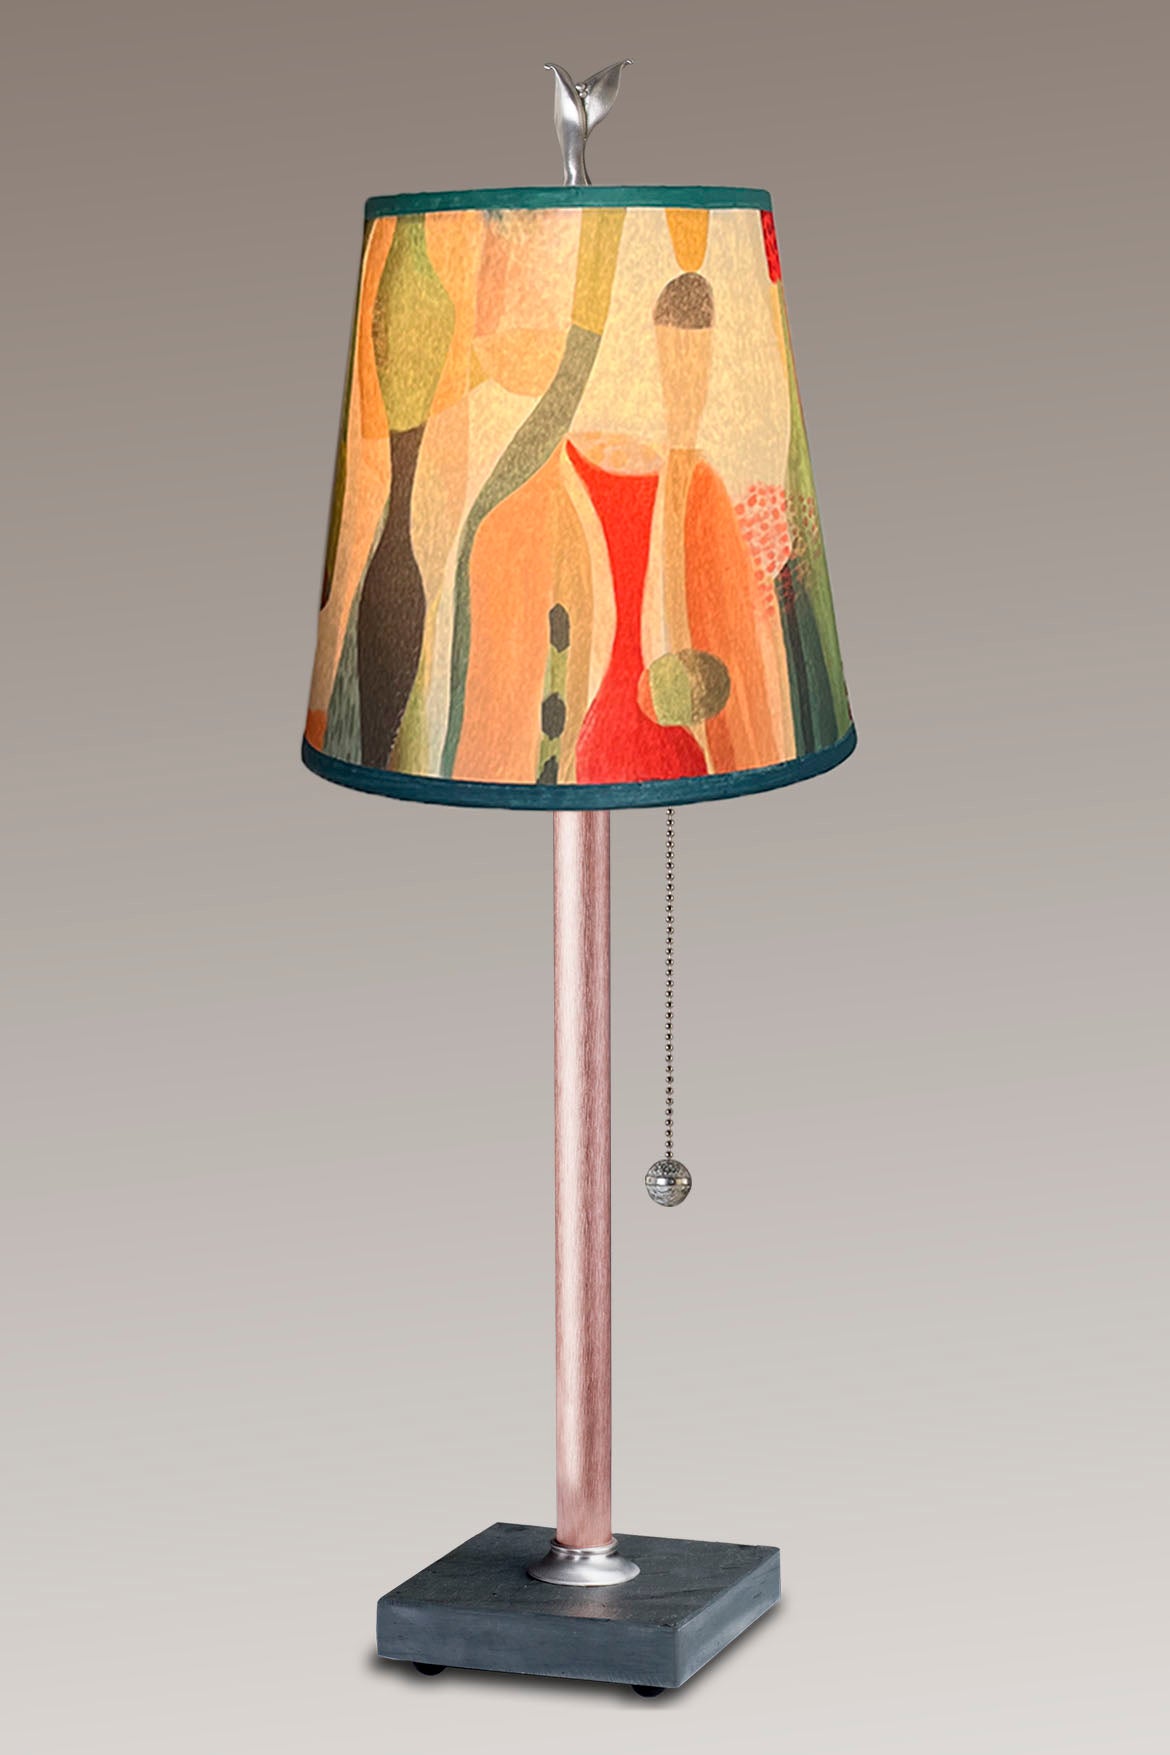 Janna Ugone &amp; Co Table Lamp Copper Table Lamp with Small Drum Shade in Riviera in Poppy